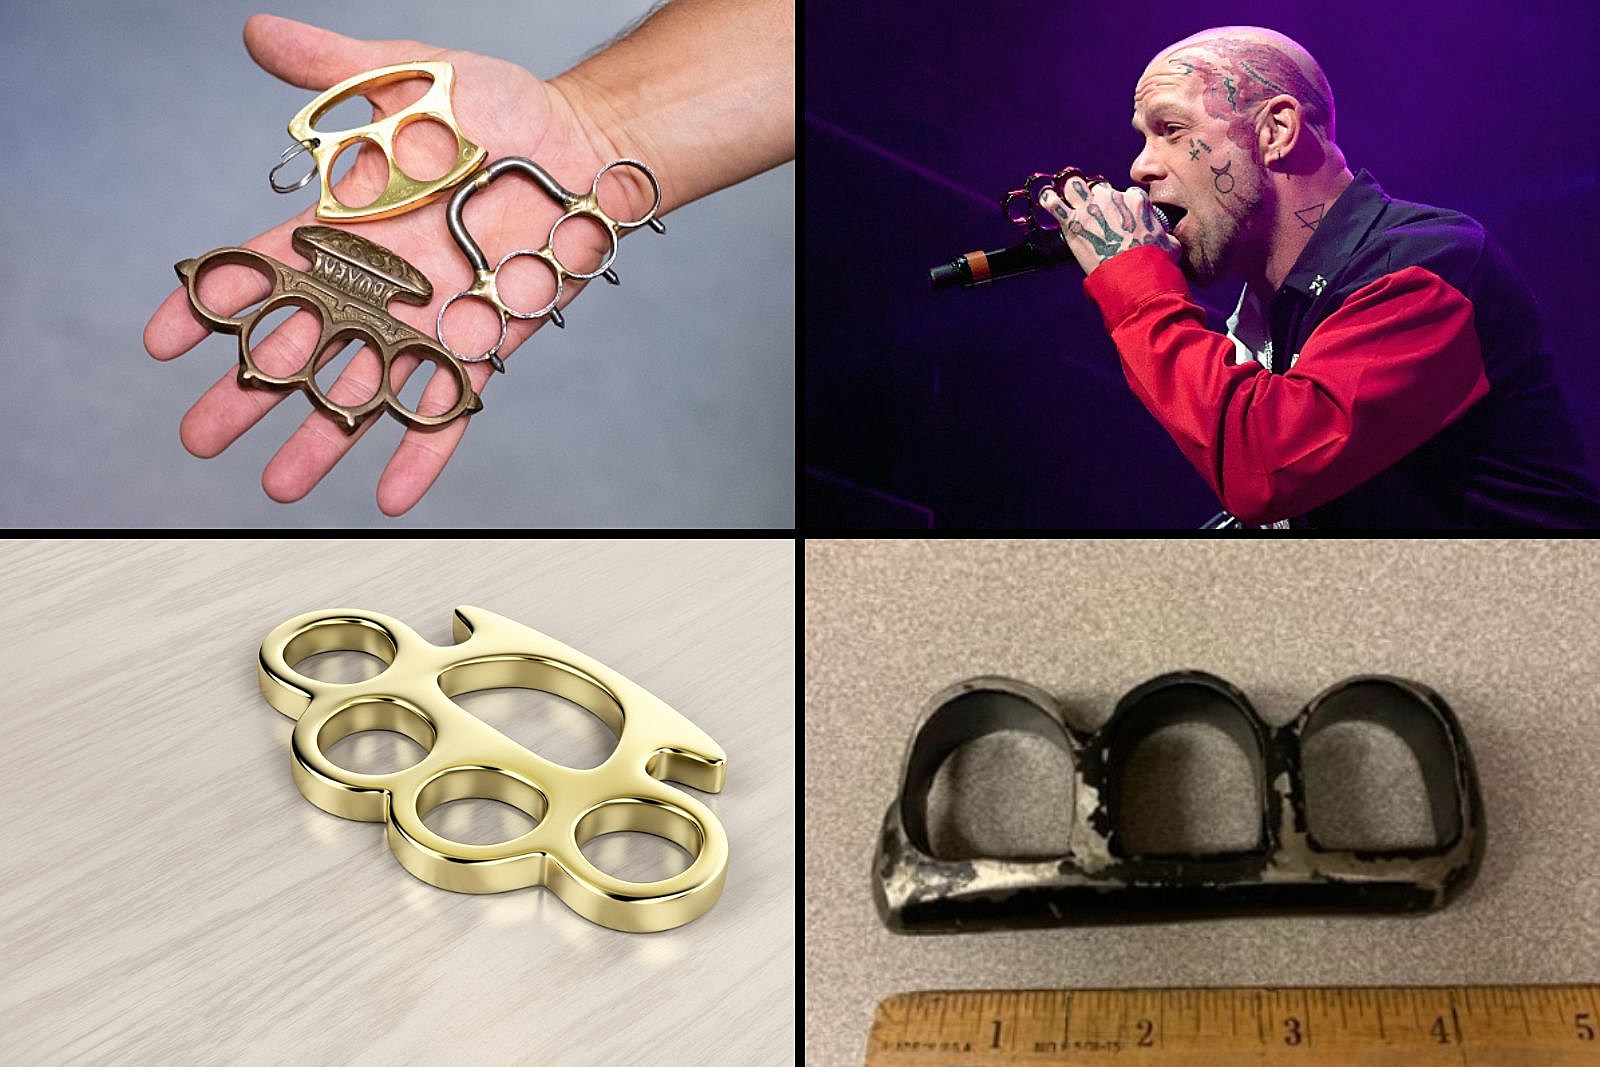 Brass Knuckles Illegal in Texas for Sale or Possession – Fort